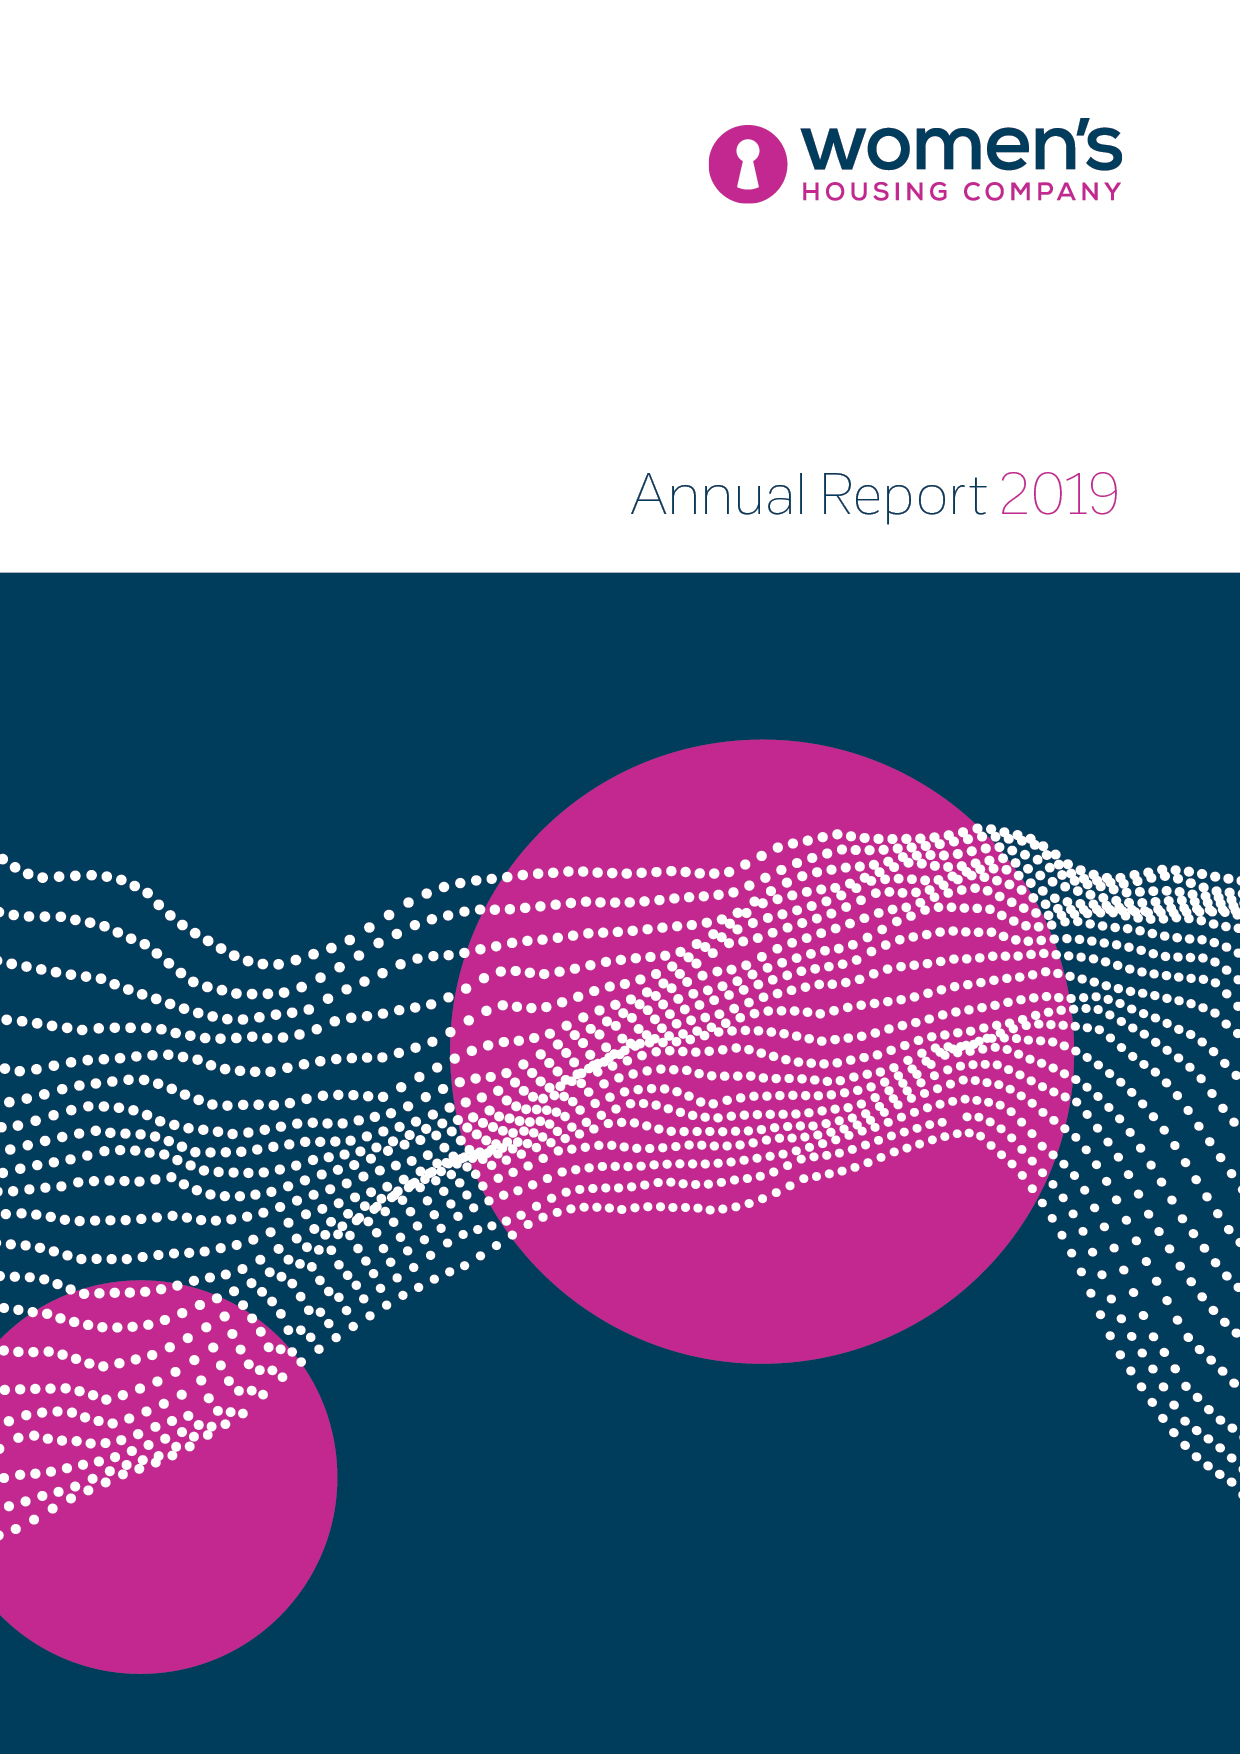 Women's Housing Company Annual Report 2019 Cover